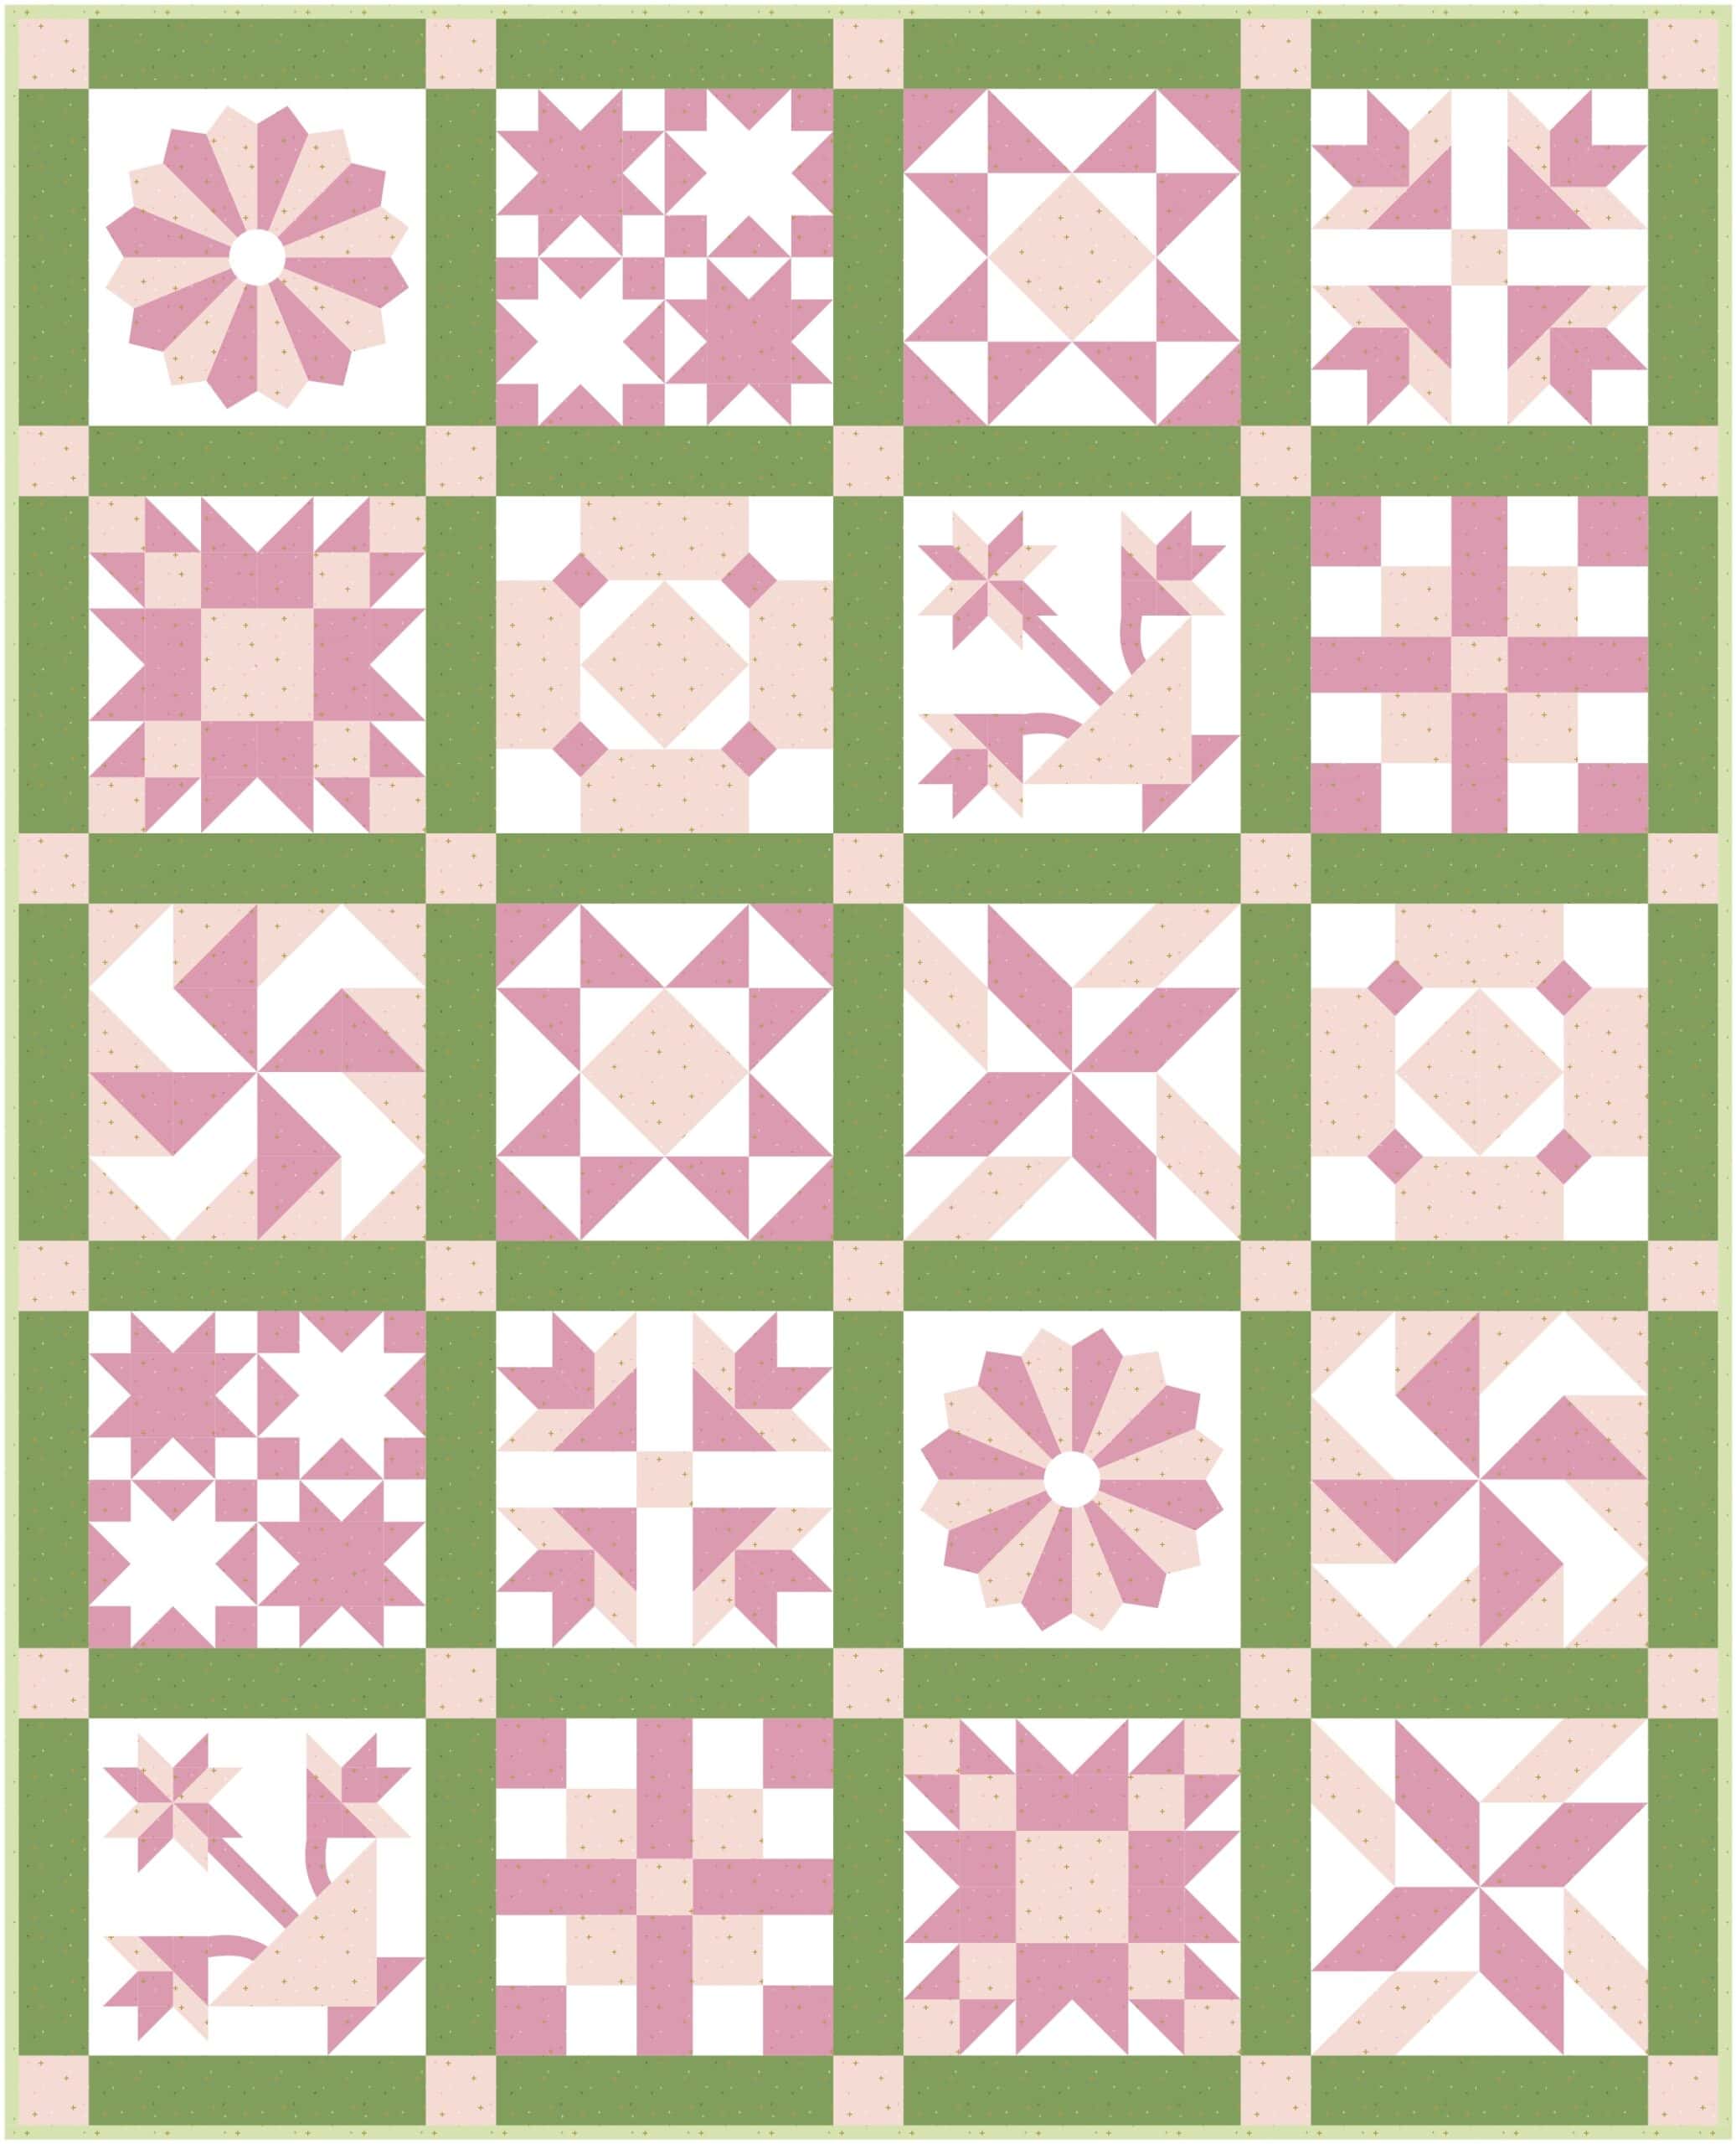 Mockup of quilt pattern in pink and green